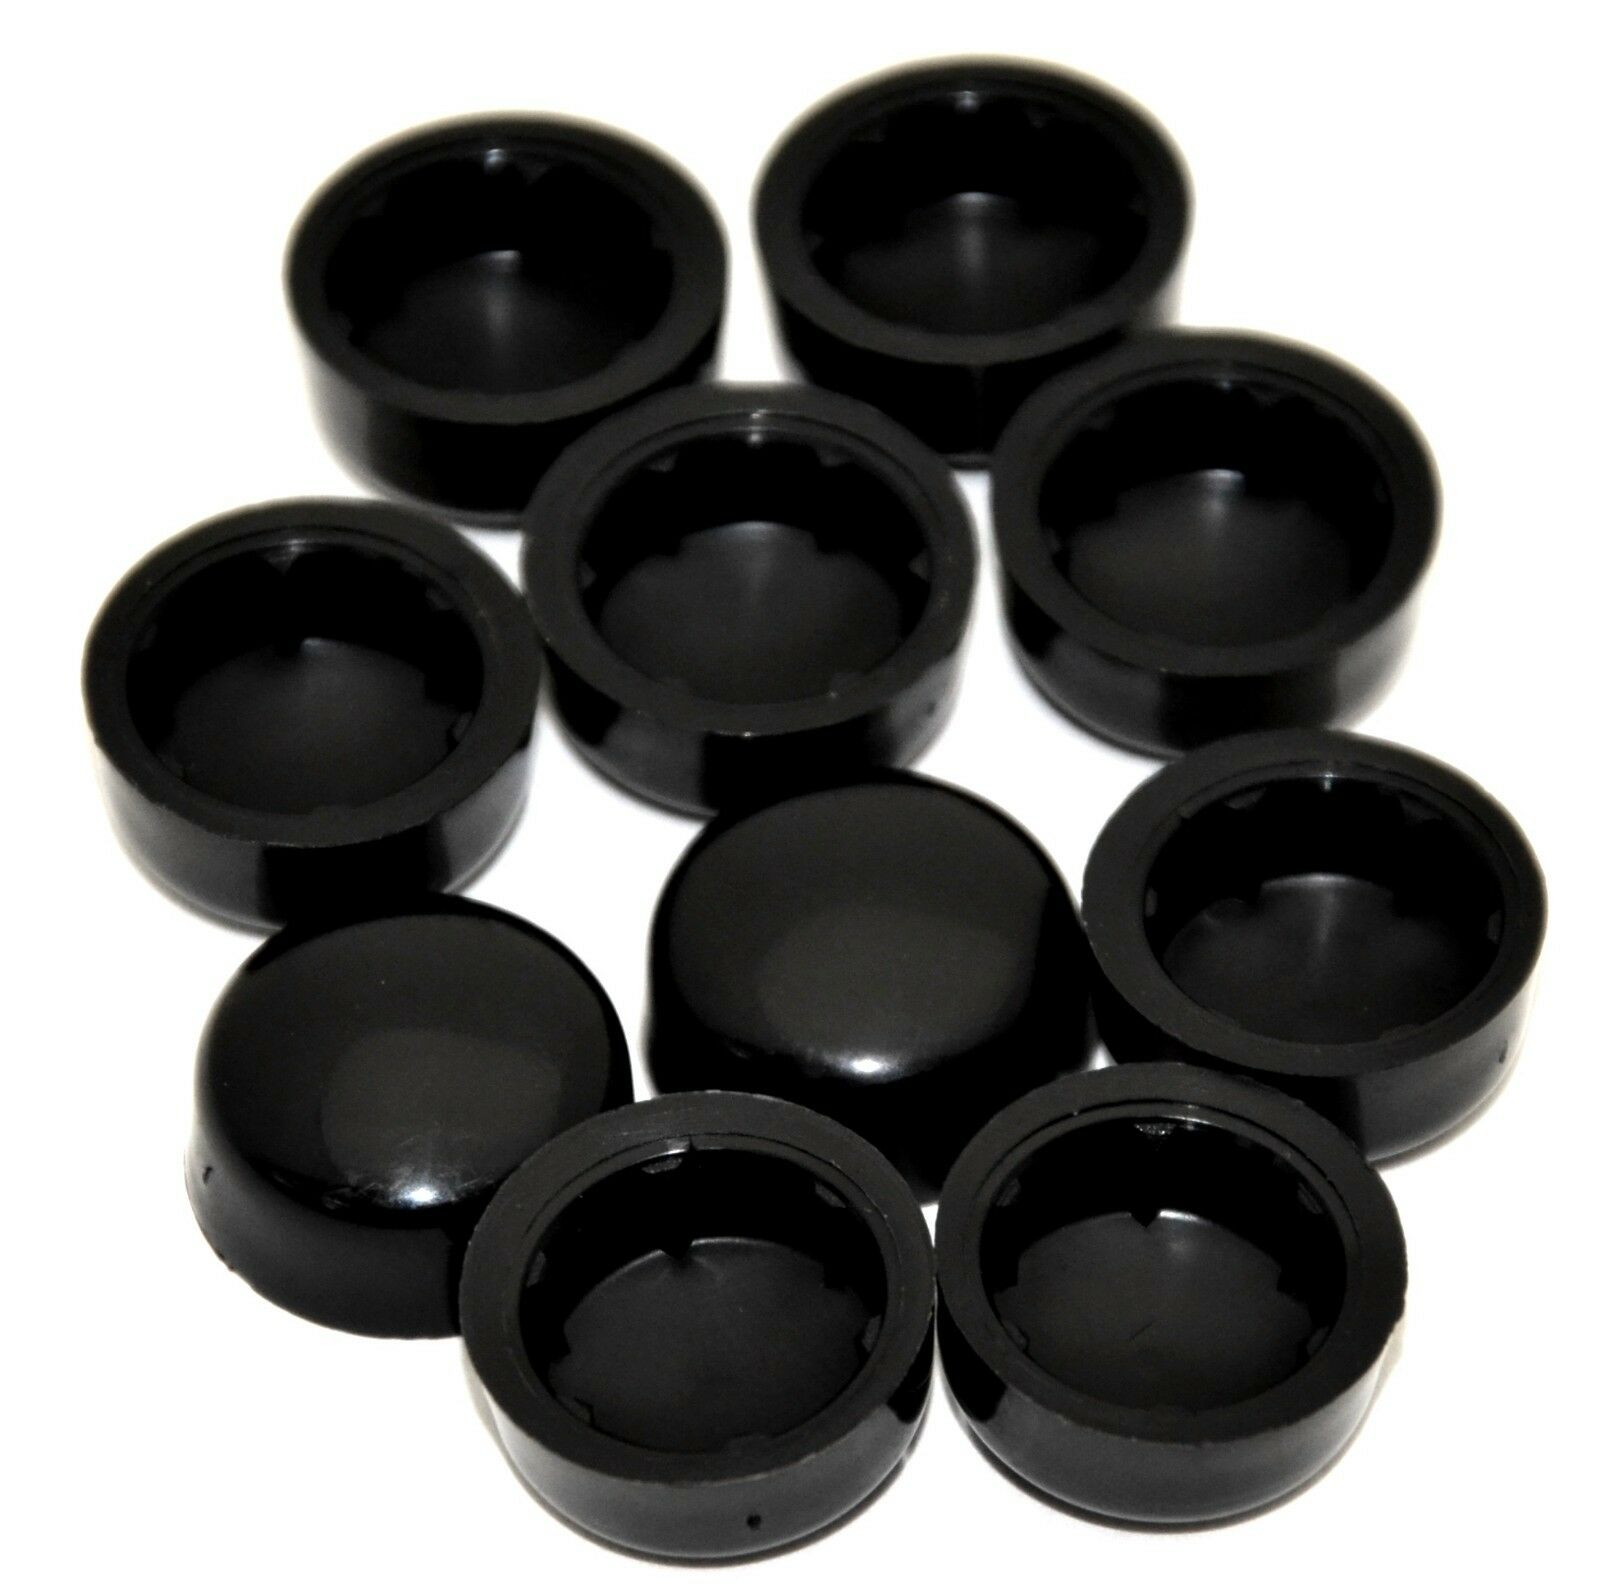 Hex Head Bolt Nut Cover(10) Dome Style 7/16" Black Plastic Finish Push On